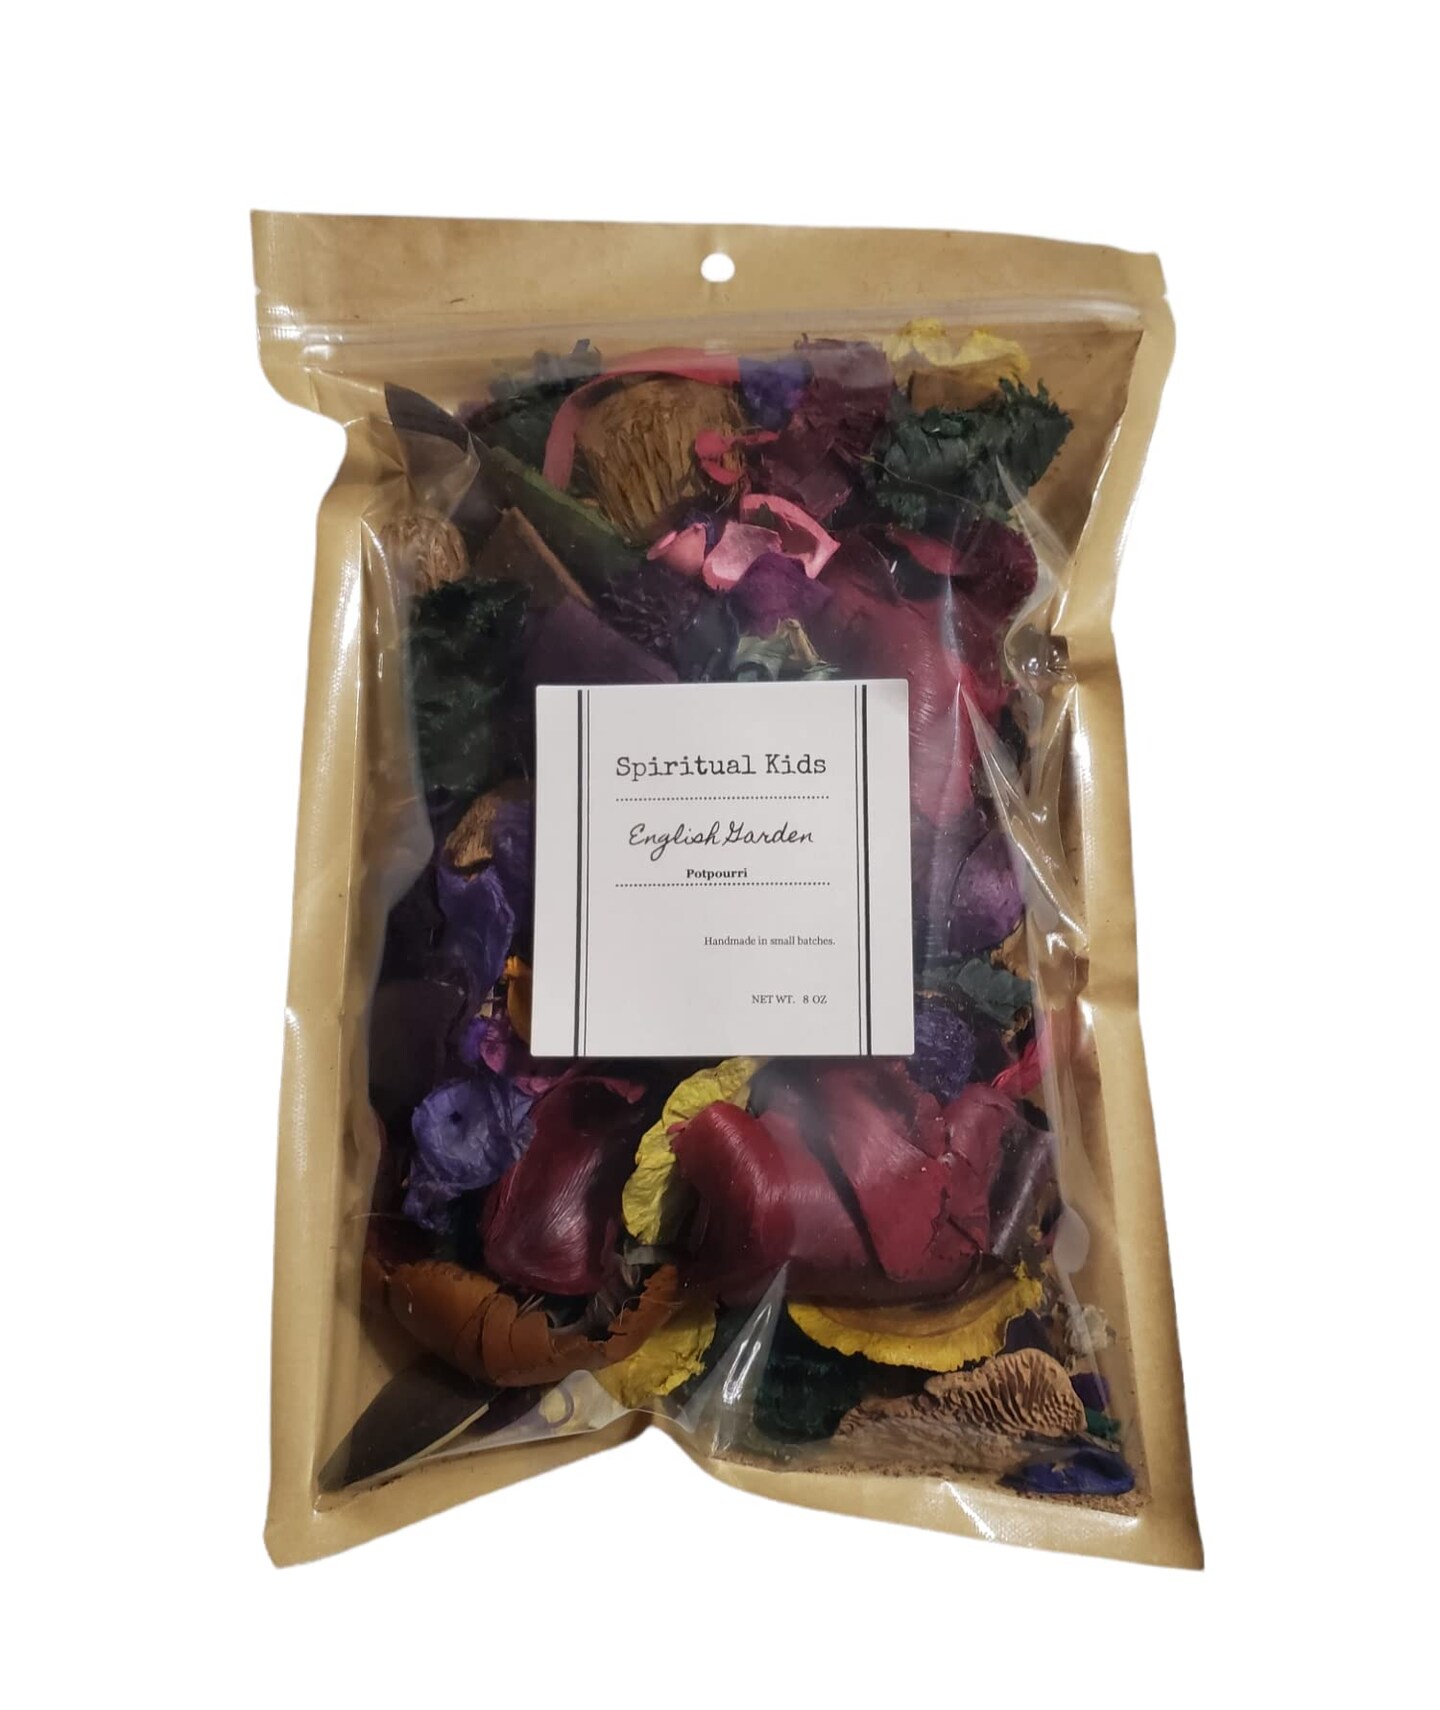 English Garden Potpourri 8oz Bag Made with Fragrant/Essential Oils HandMade FREE SHIPPING SCENTED House Warming Gift| Wedding Favors | Floral Potpourri